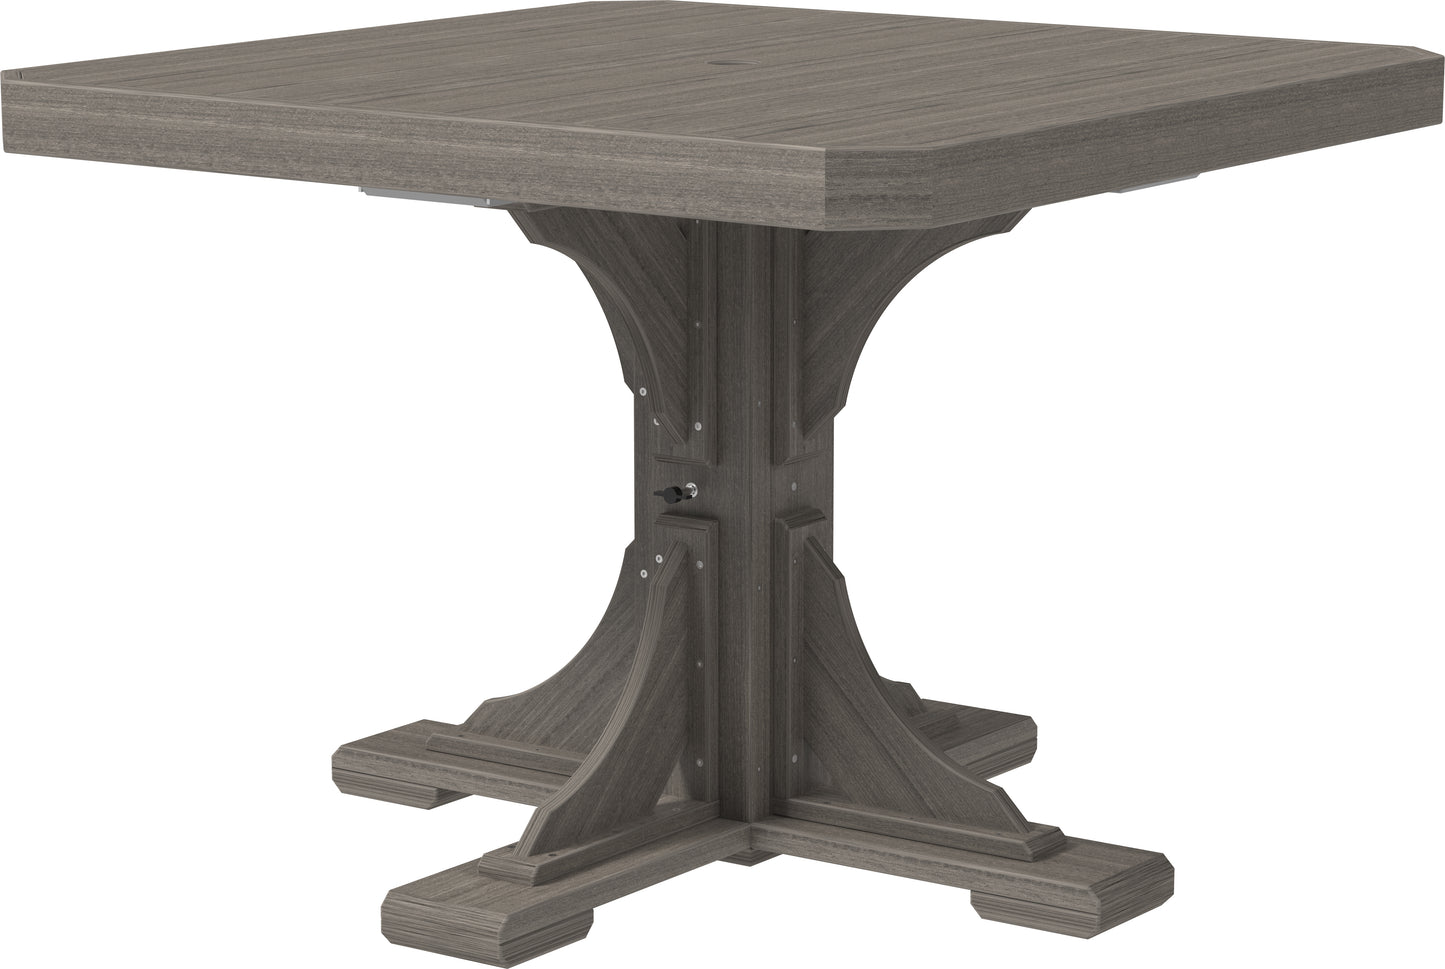 LuxCraft Recycled Plastic 41" Square Dining Height Table - LEAD TIME TO SHIP 3 TO 4 WEEKS